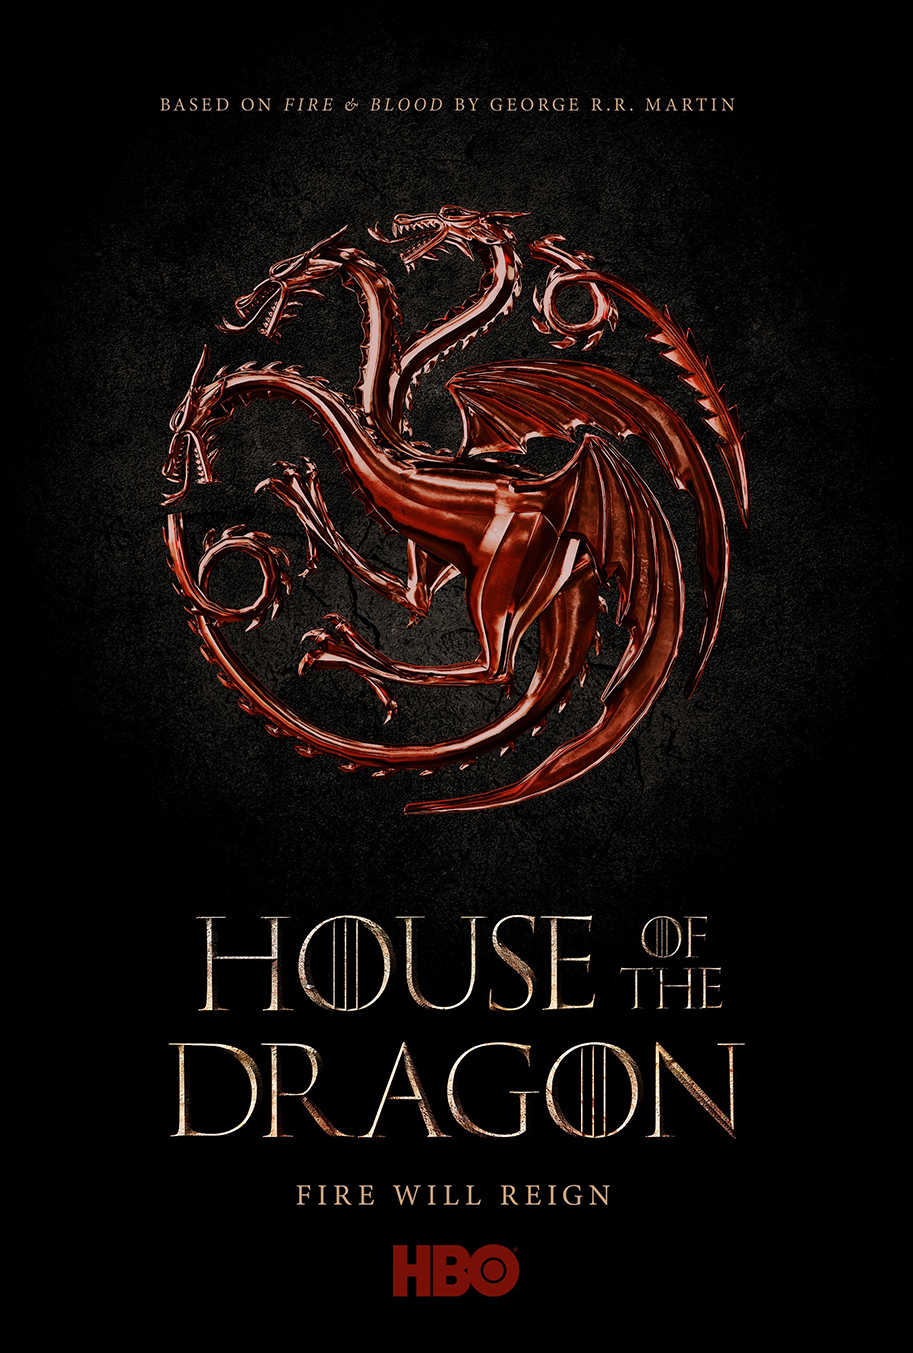 House of the Dragon, Game of Thrones, HBO, poster